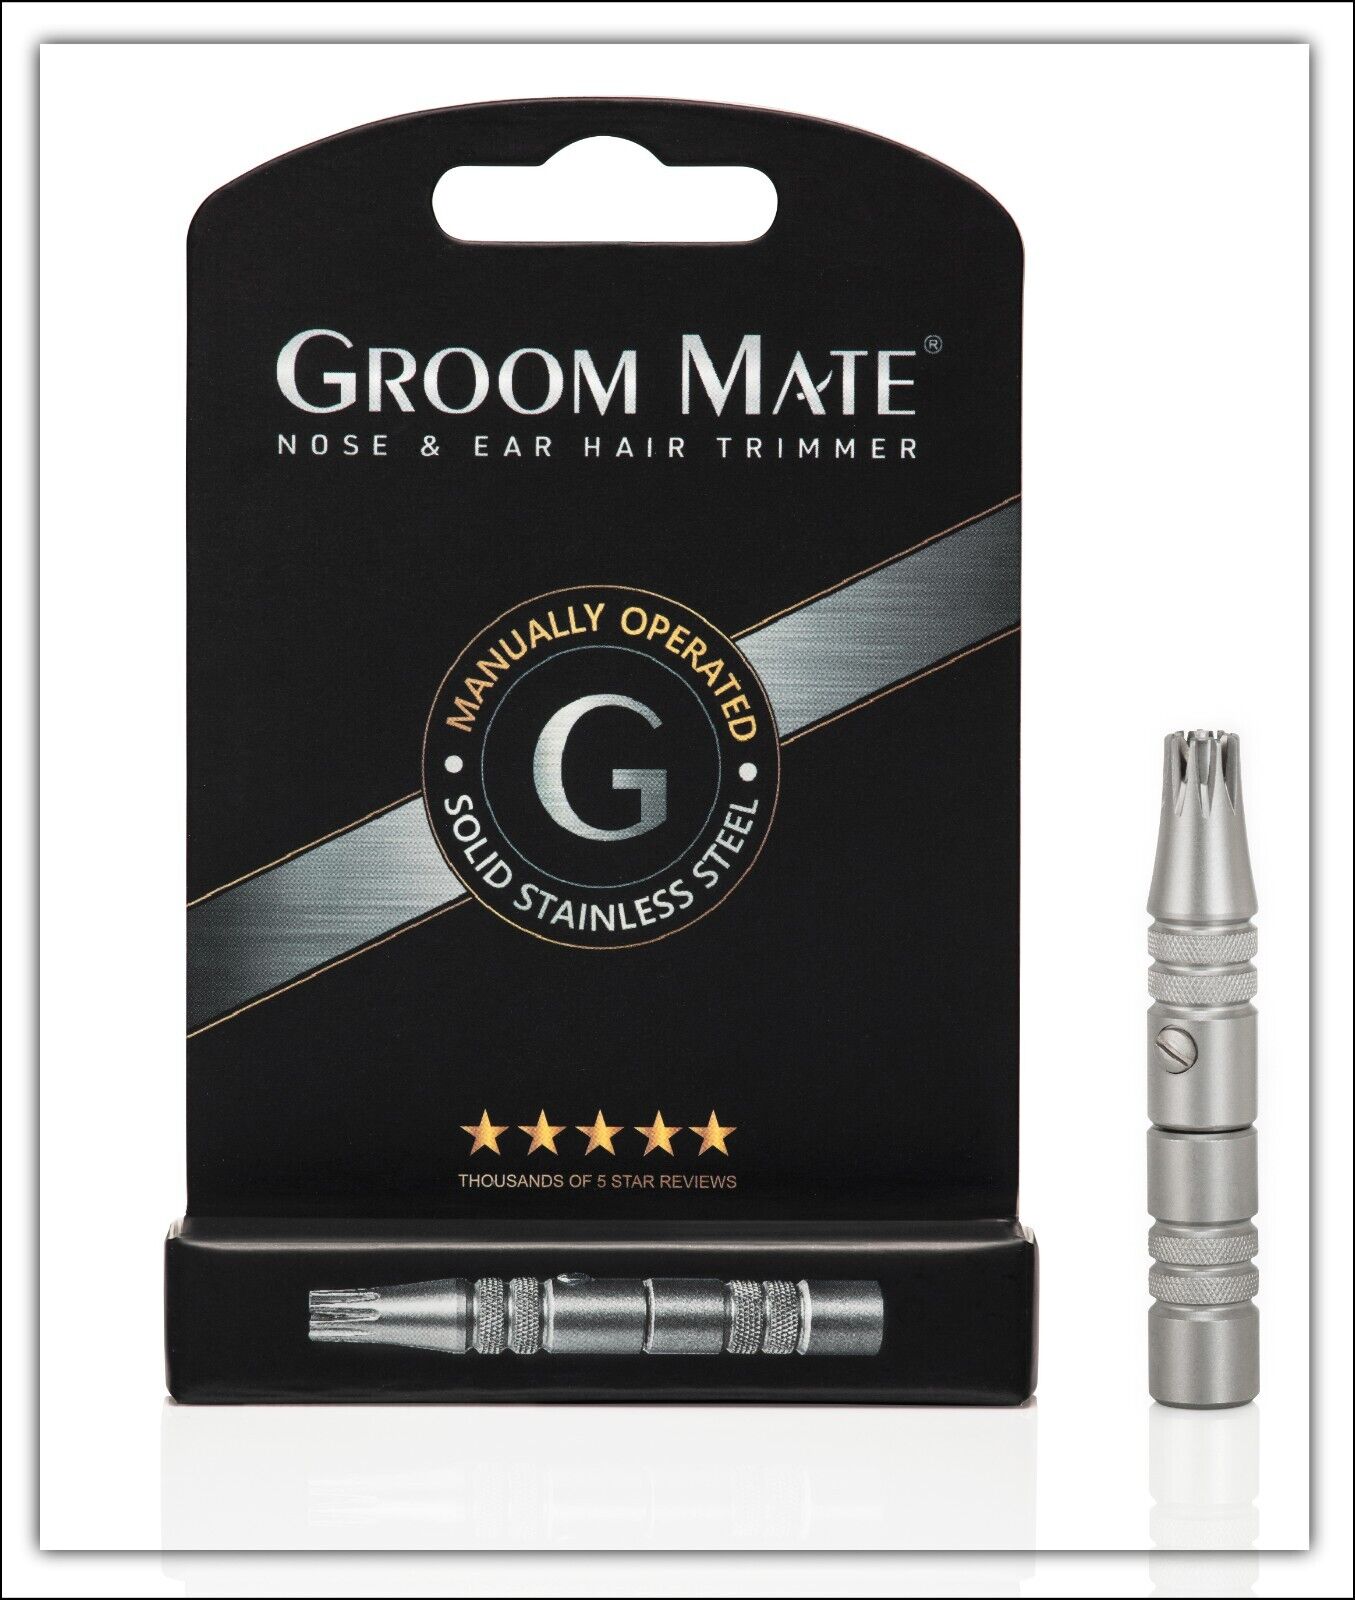 Authentic Groom Mate Nose Hair Trimmer - MADE IN USA - GUARANTEE - Stainless Groom Mate 25420 - фотография #2